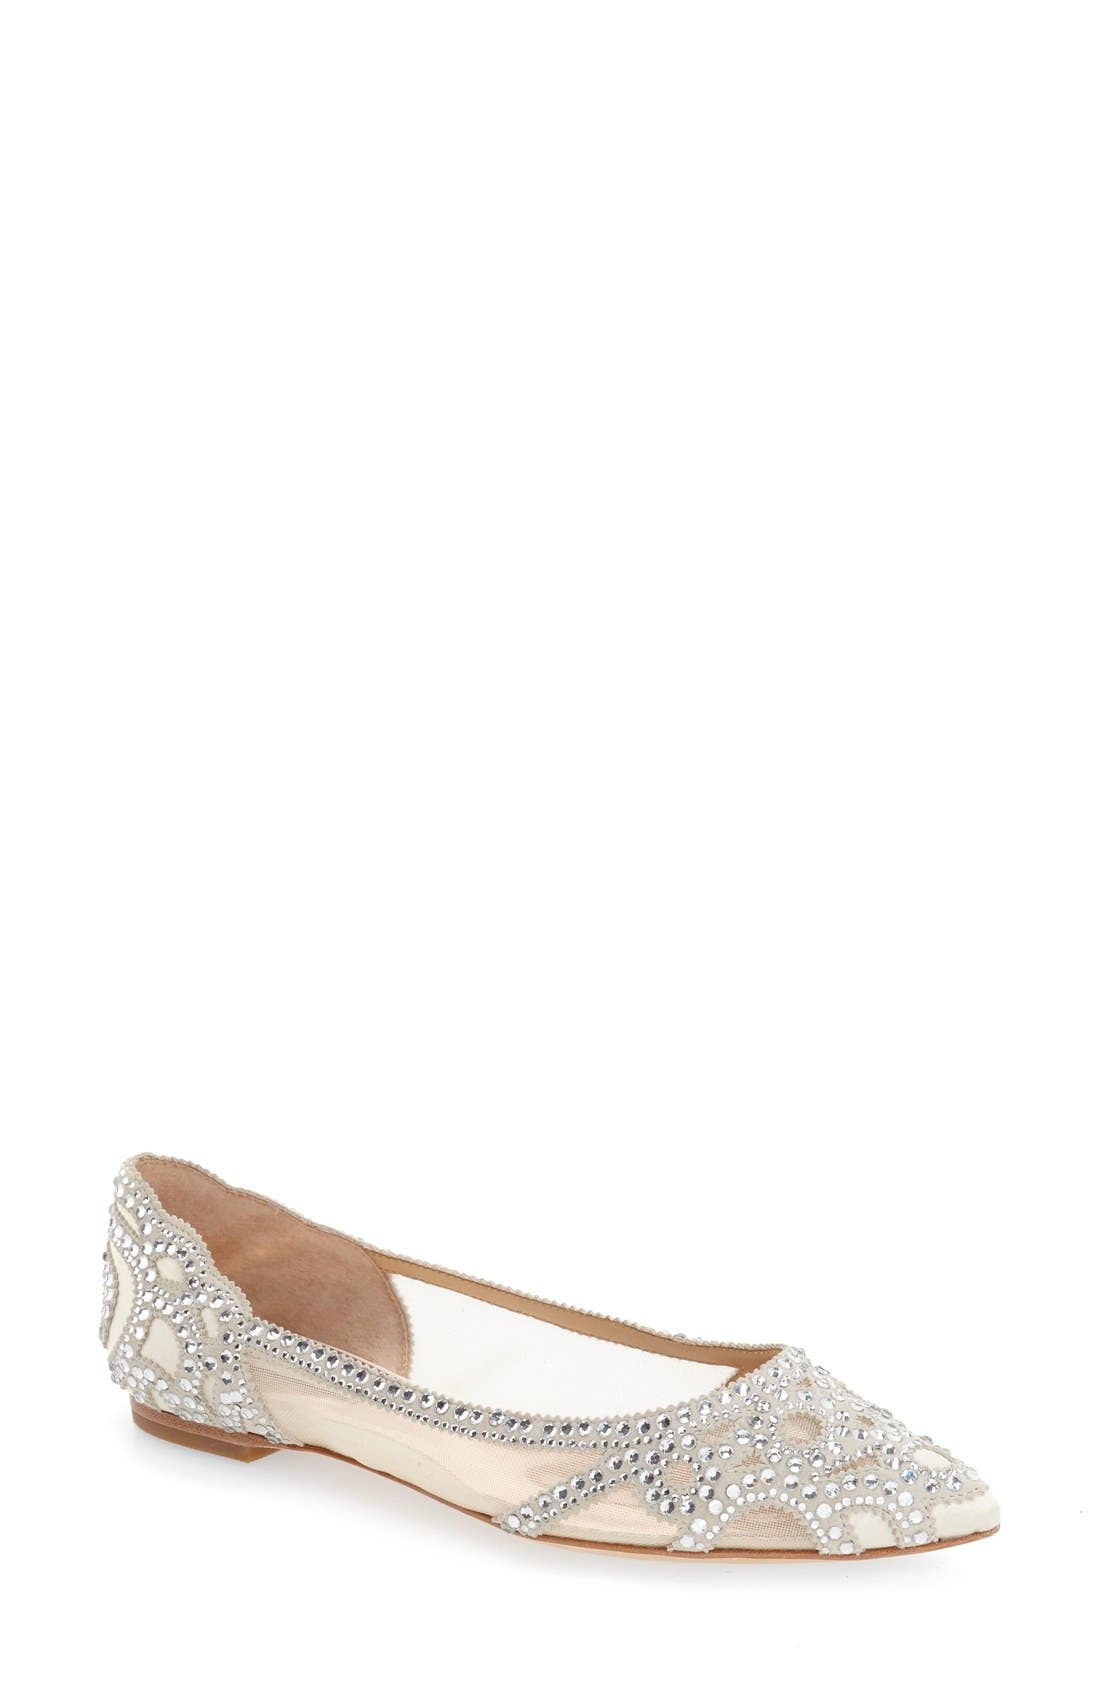 Women's Pointed Toe Flats | Nordstrom